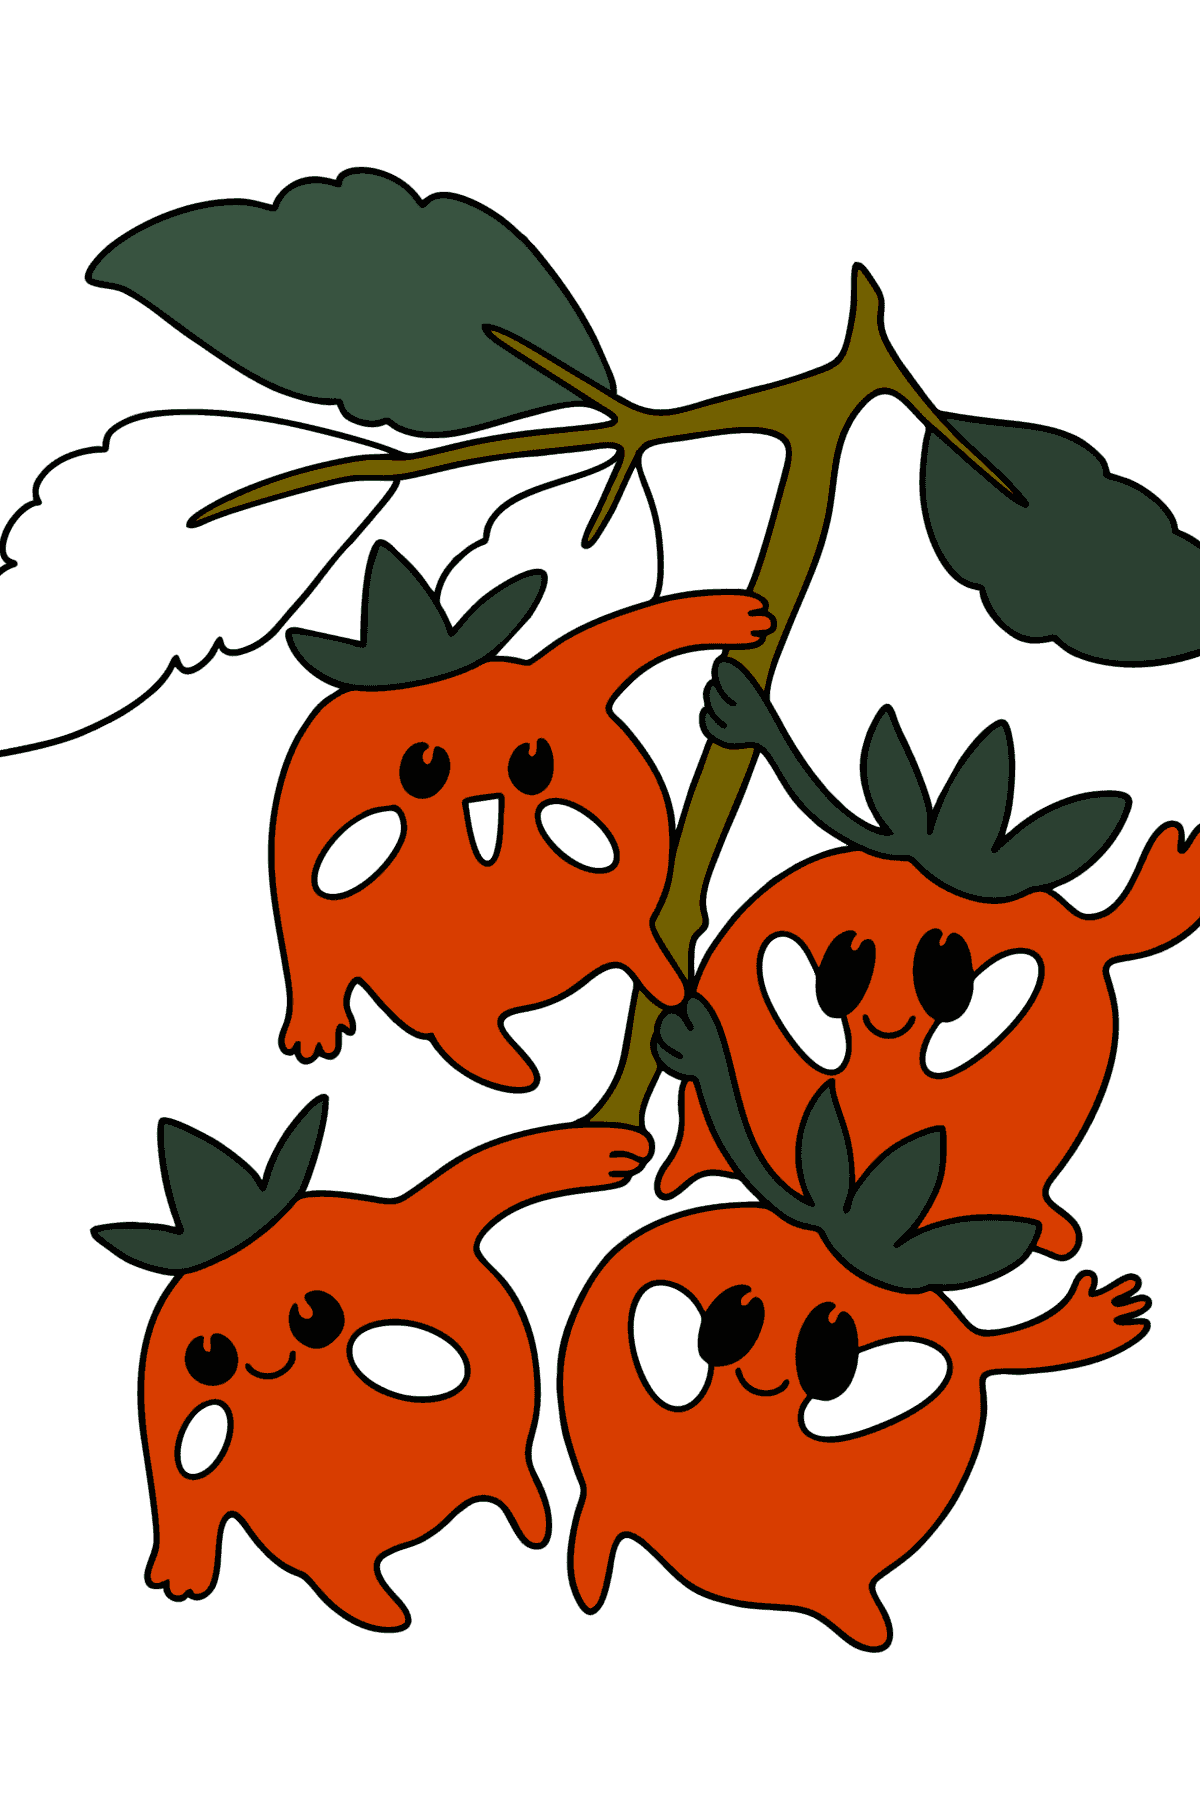 Cherry tomatoes сoloring page - Coloring Pages for Kids